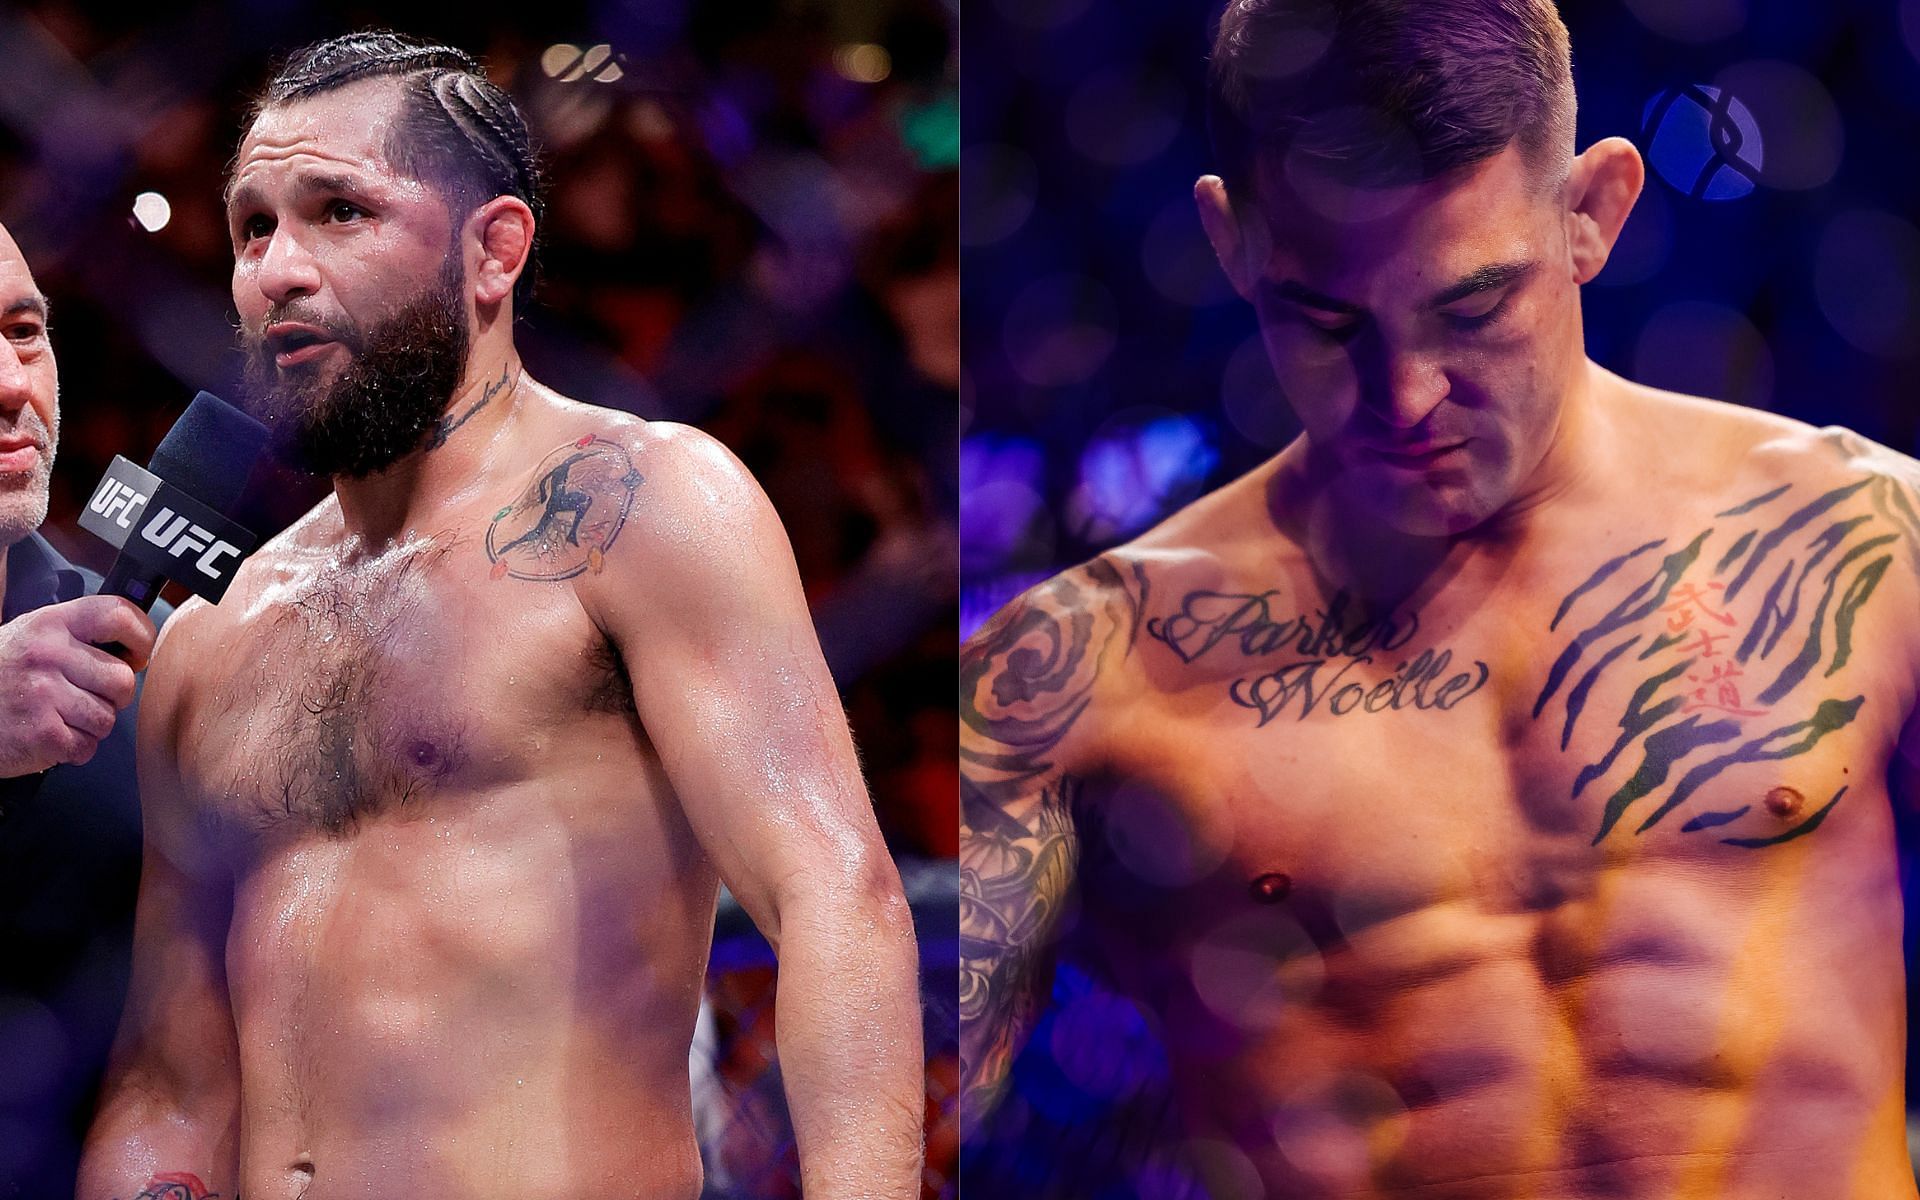 Jorge Masvidal (left) and Dustin Poirier (right) (Image credits Getty Images)